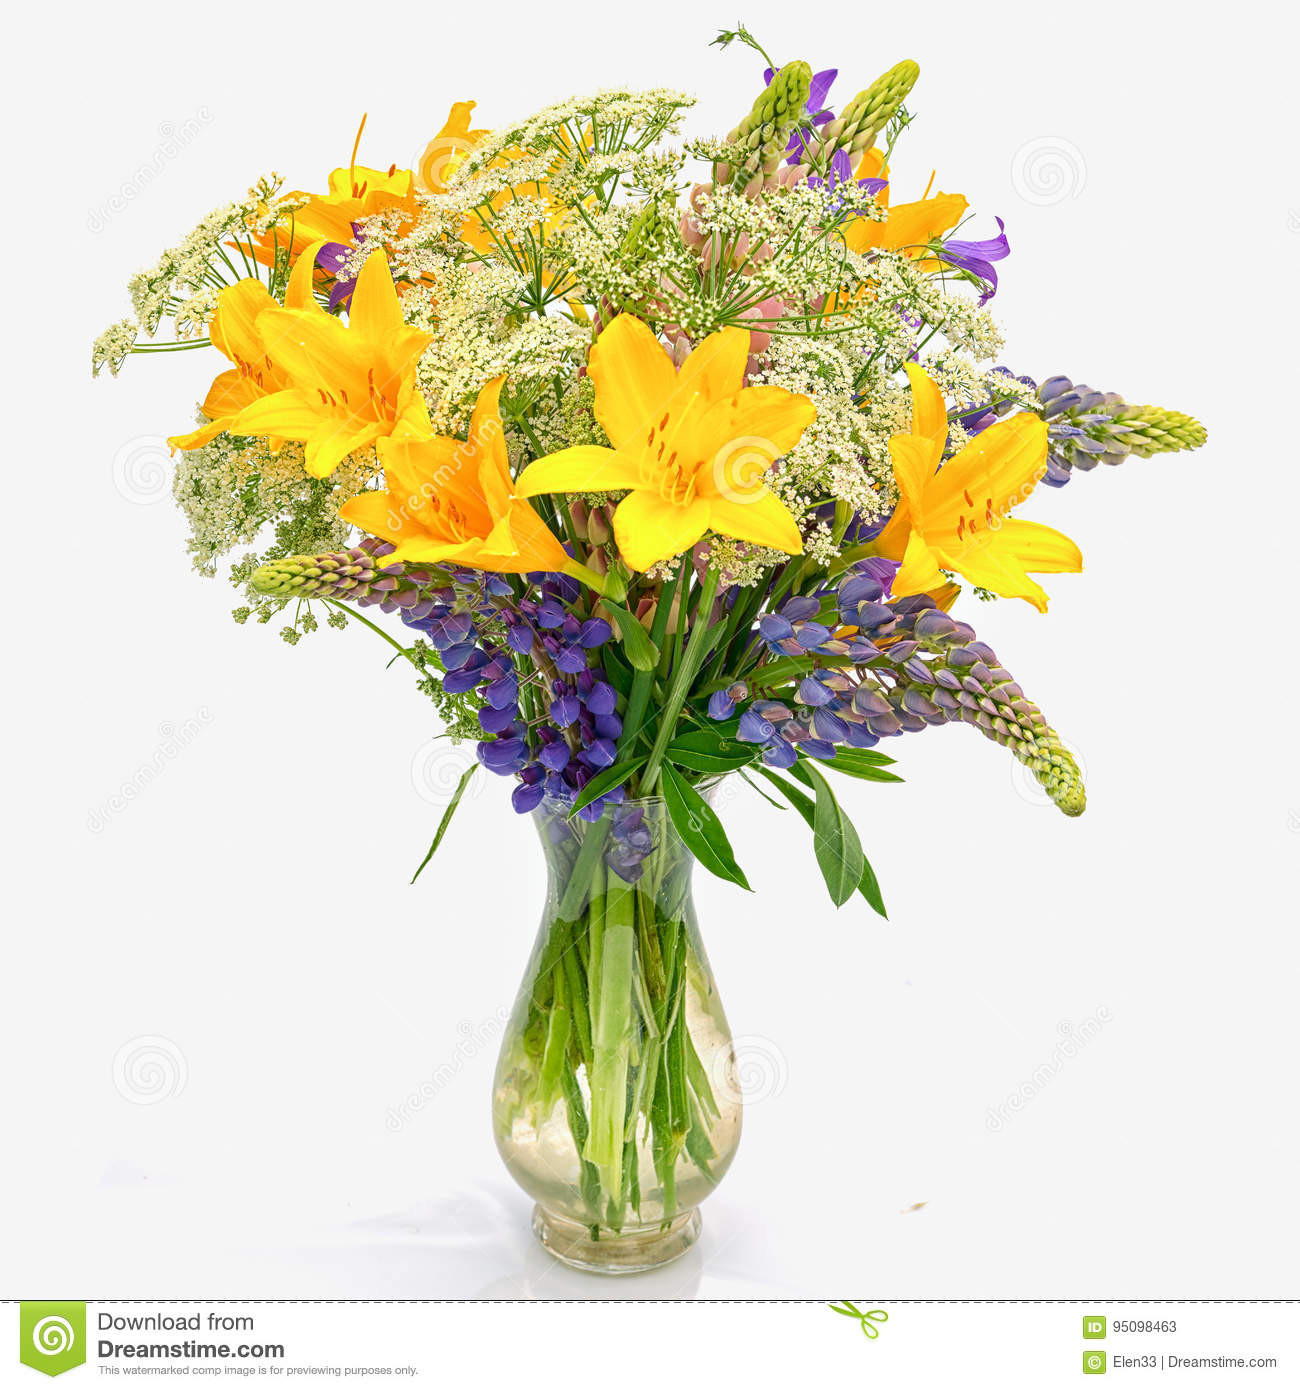 25 Stunning White Glass Flower Vase 2024 free download white glass flower vase of bouquet stock image image of bouquet beauty lily blossom 95098463 with bouquet od wild flowers achillea millefolium day lily and lupine in a transparent glass vase